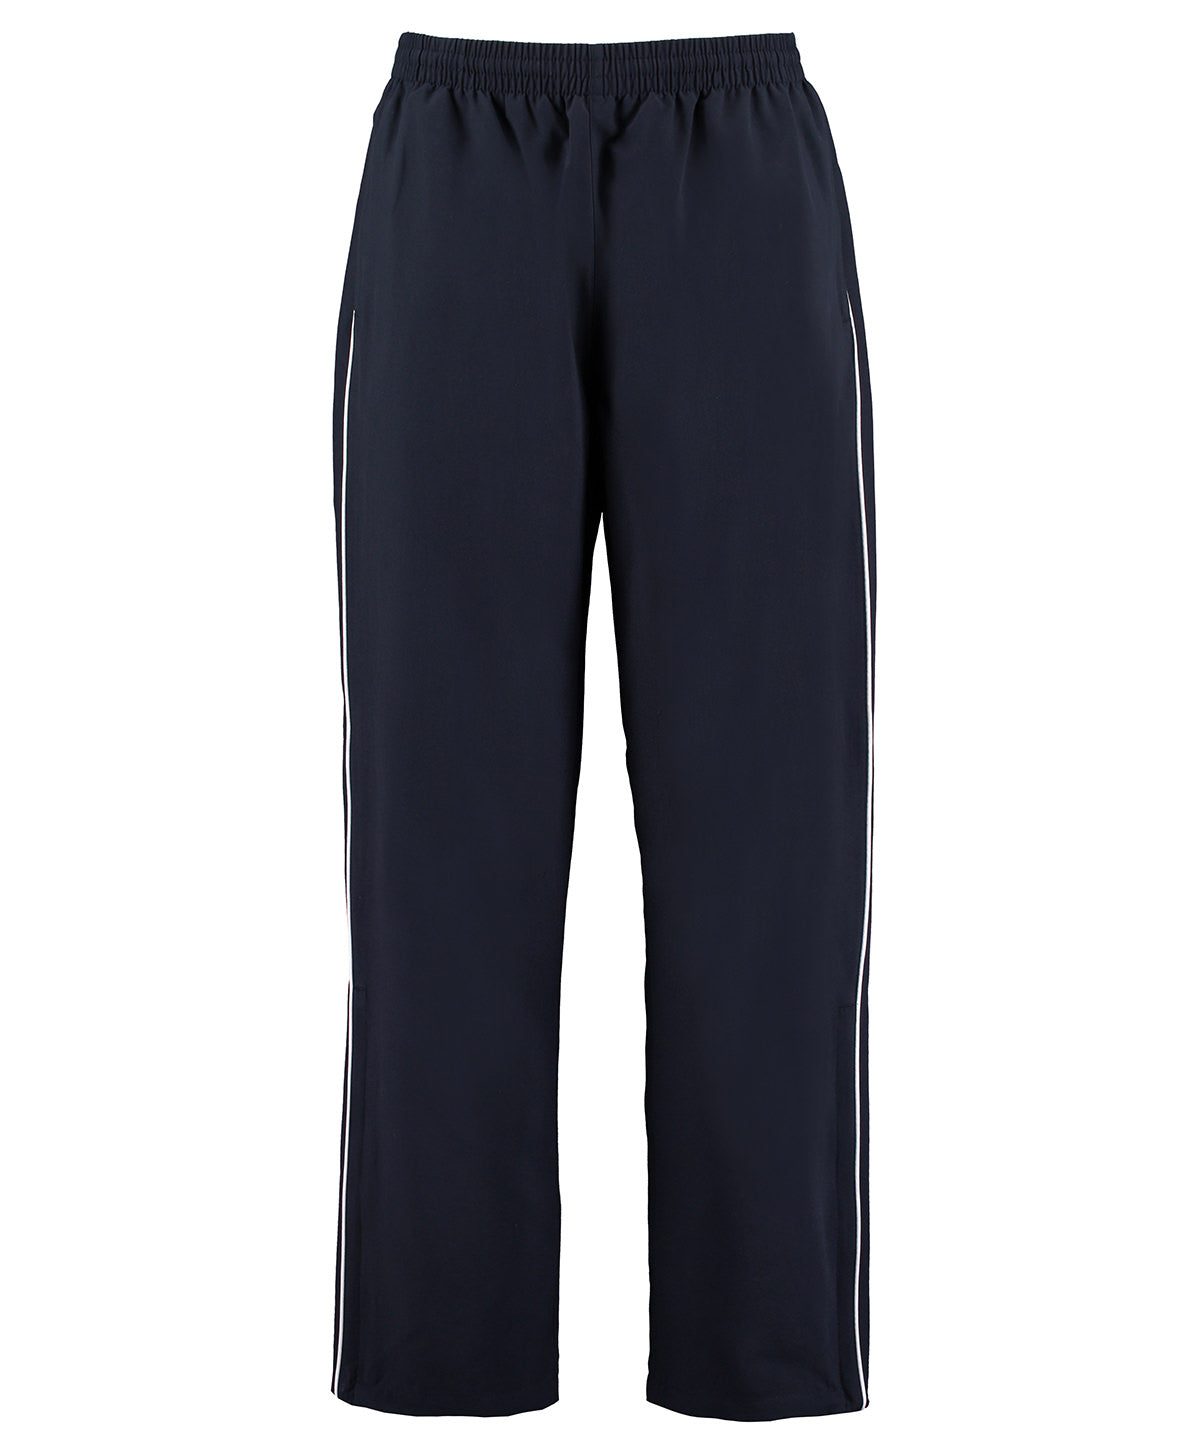 Personalised Trousers - Navy GameGear Gamegear® track pant (classic fit)